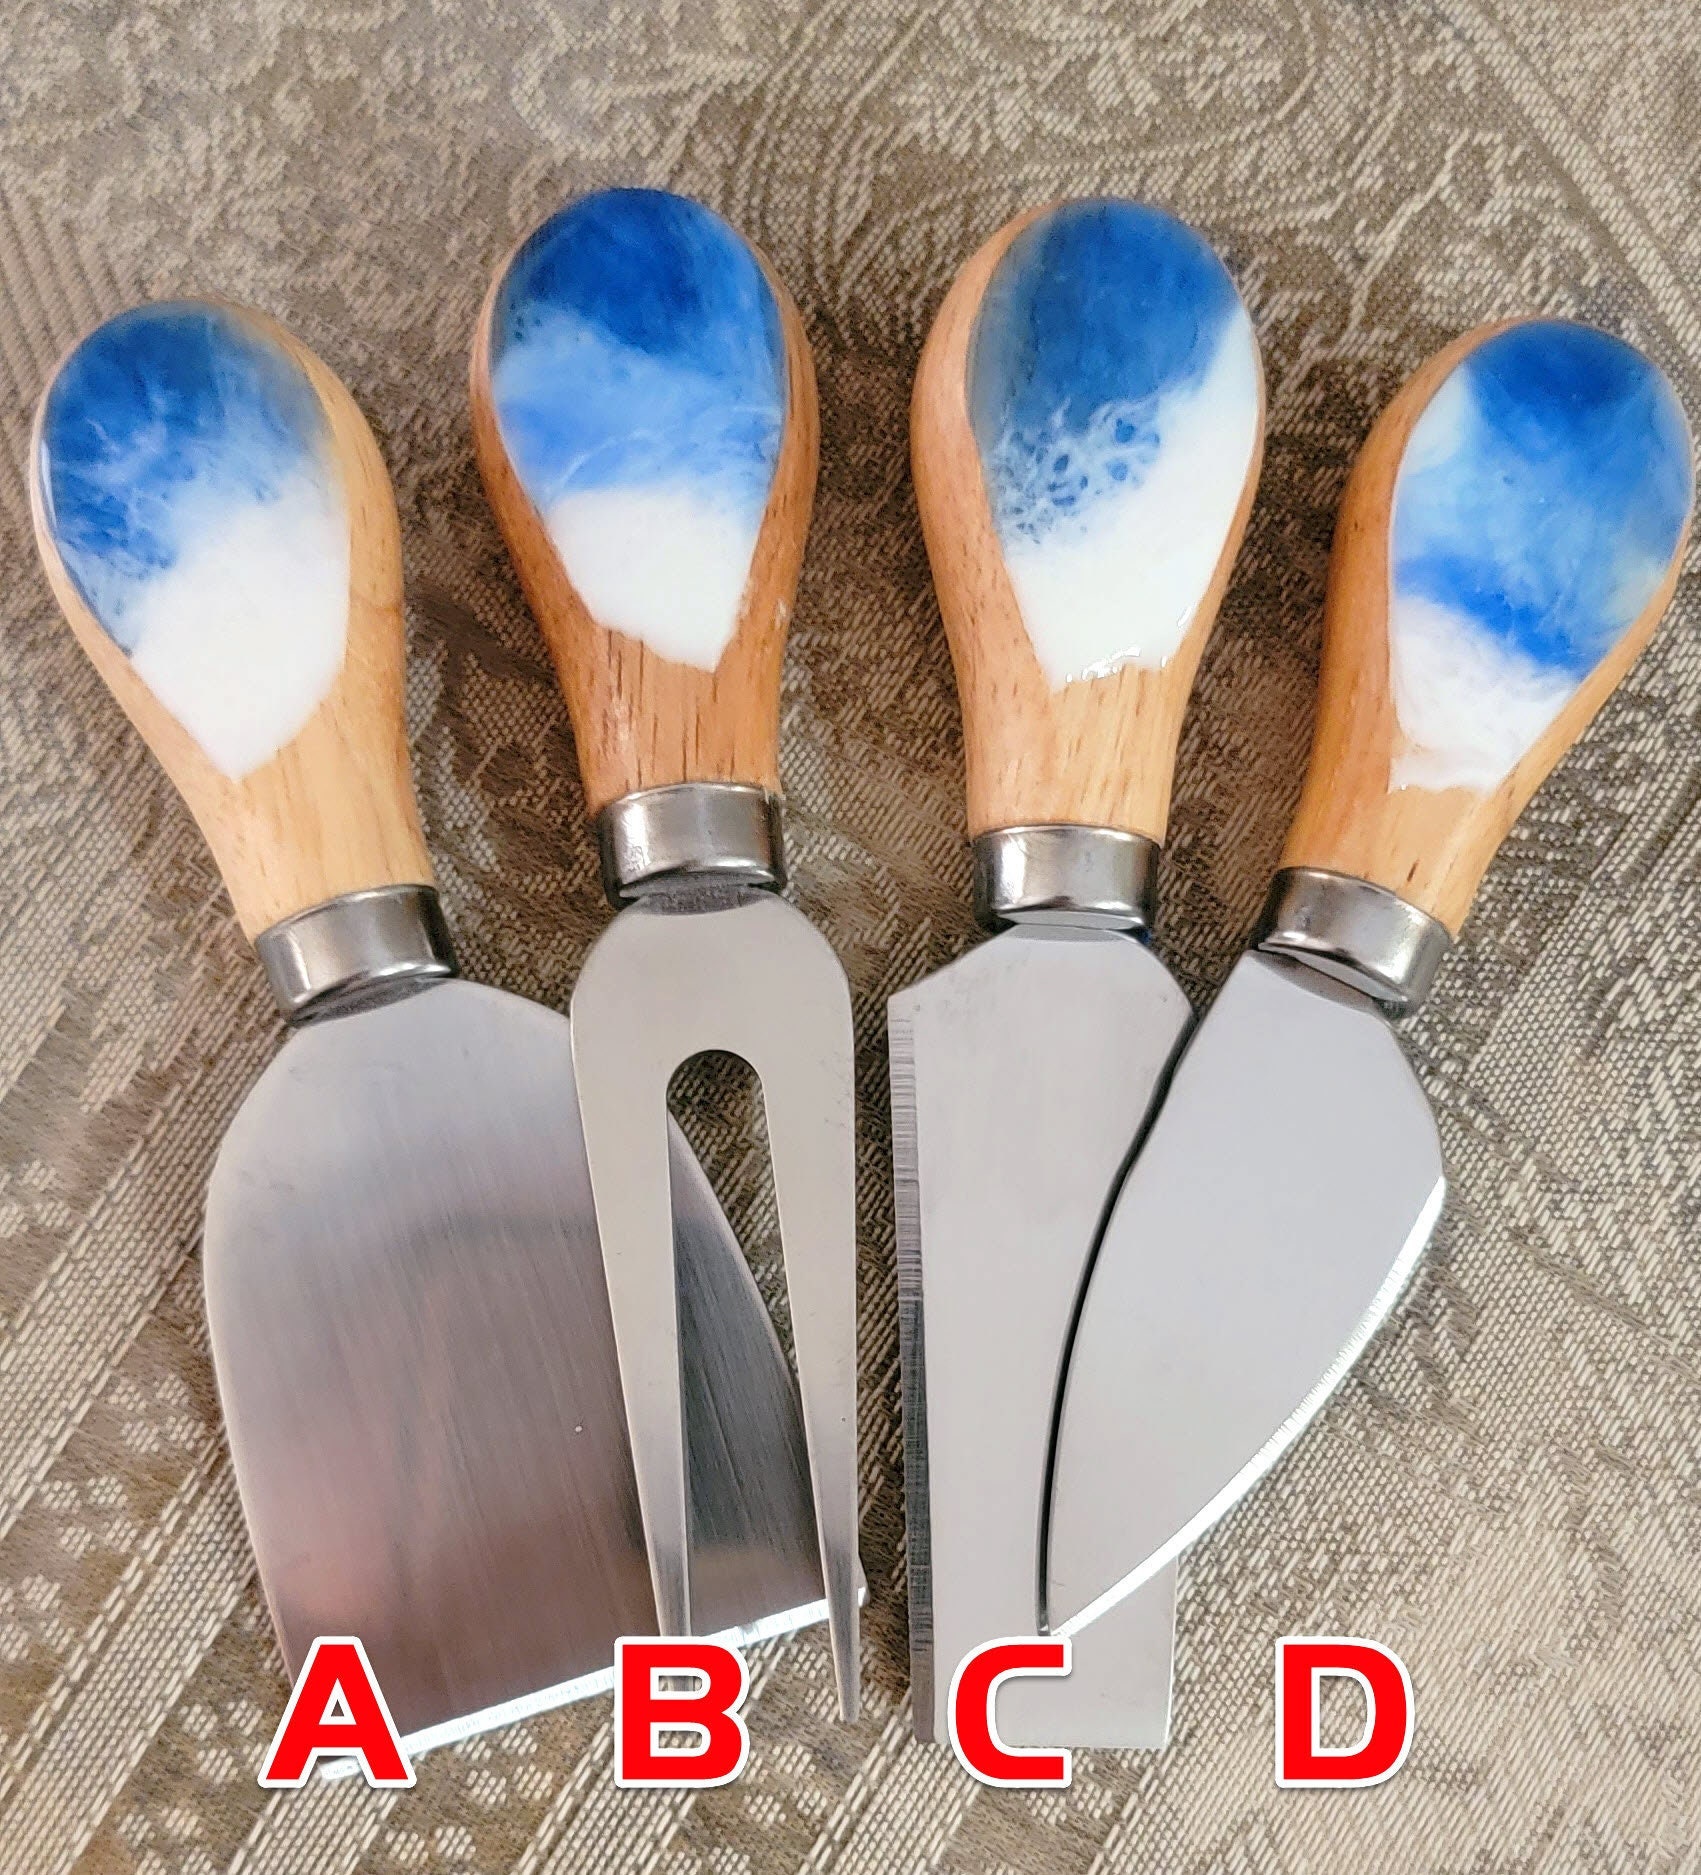 Ocean Design Cheese Knives Set of 4